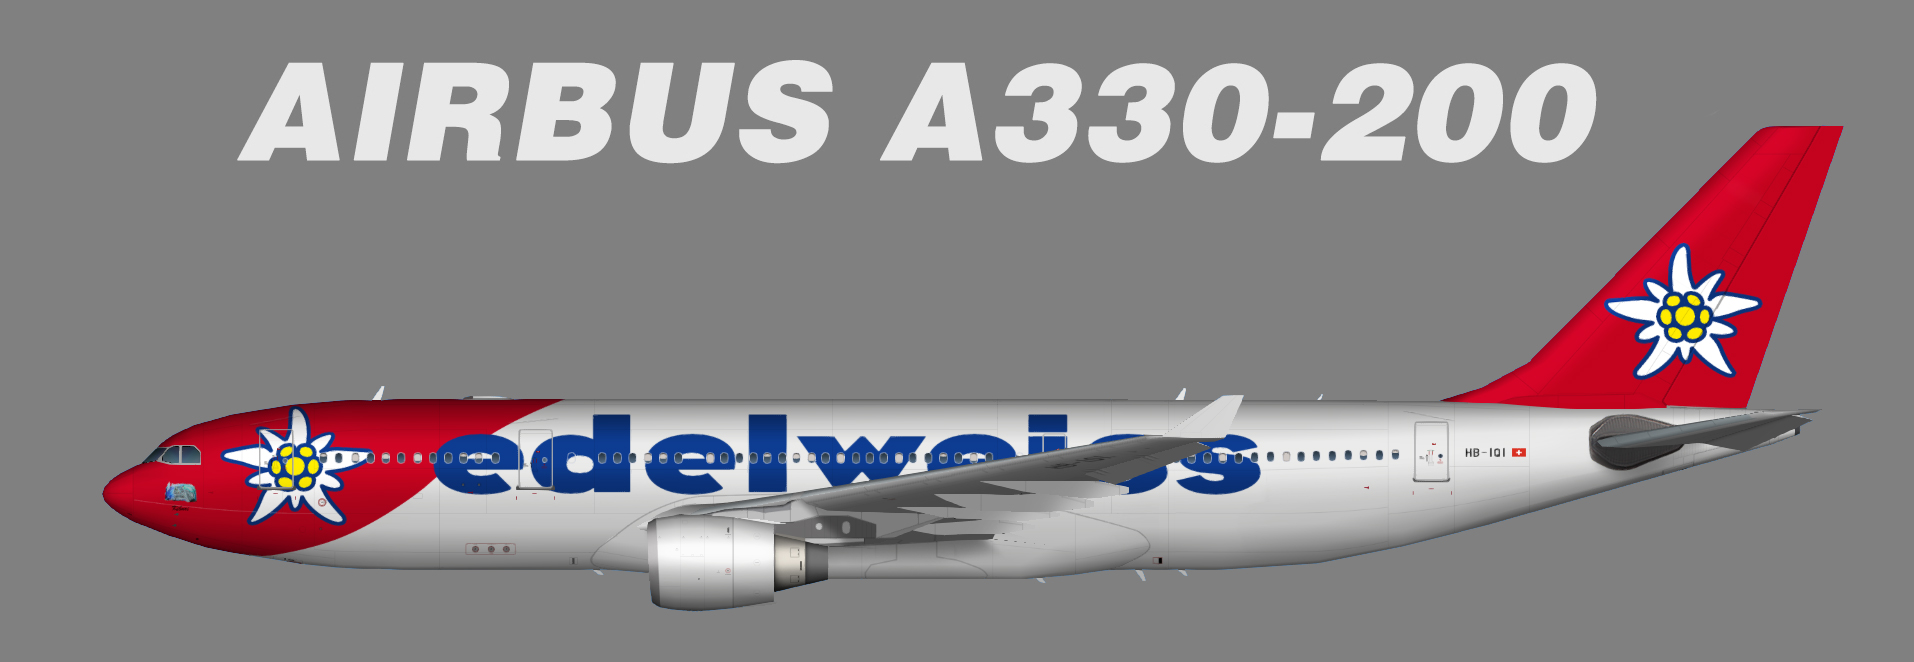 Edelweiss Airbus A330-200